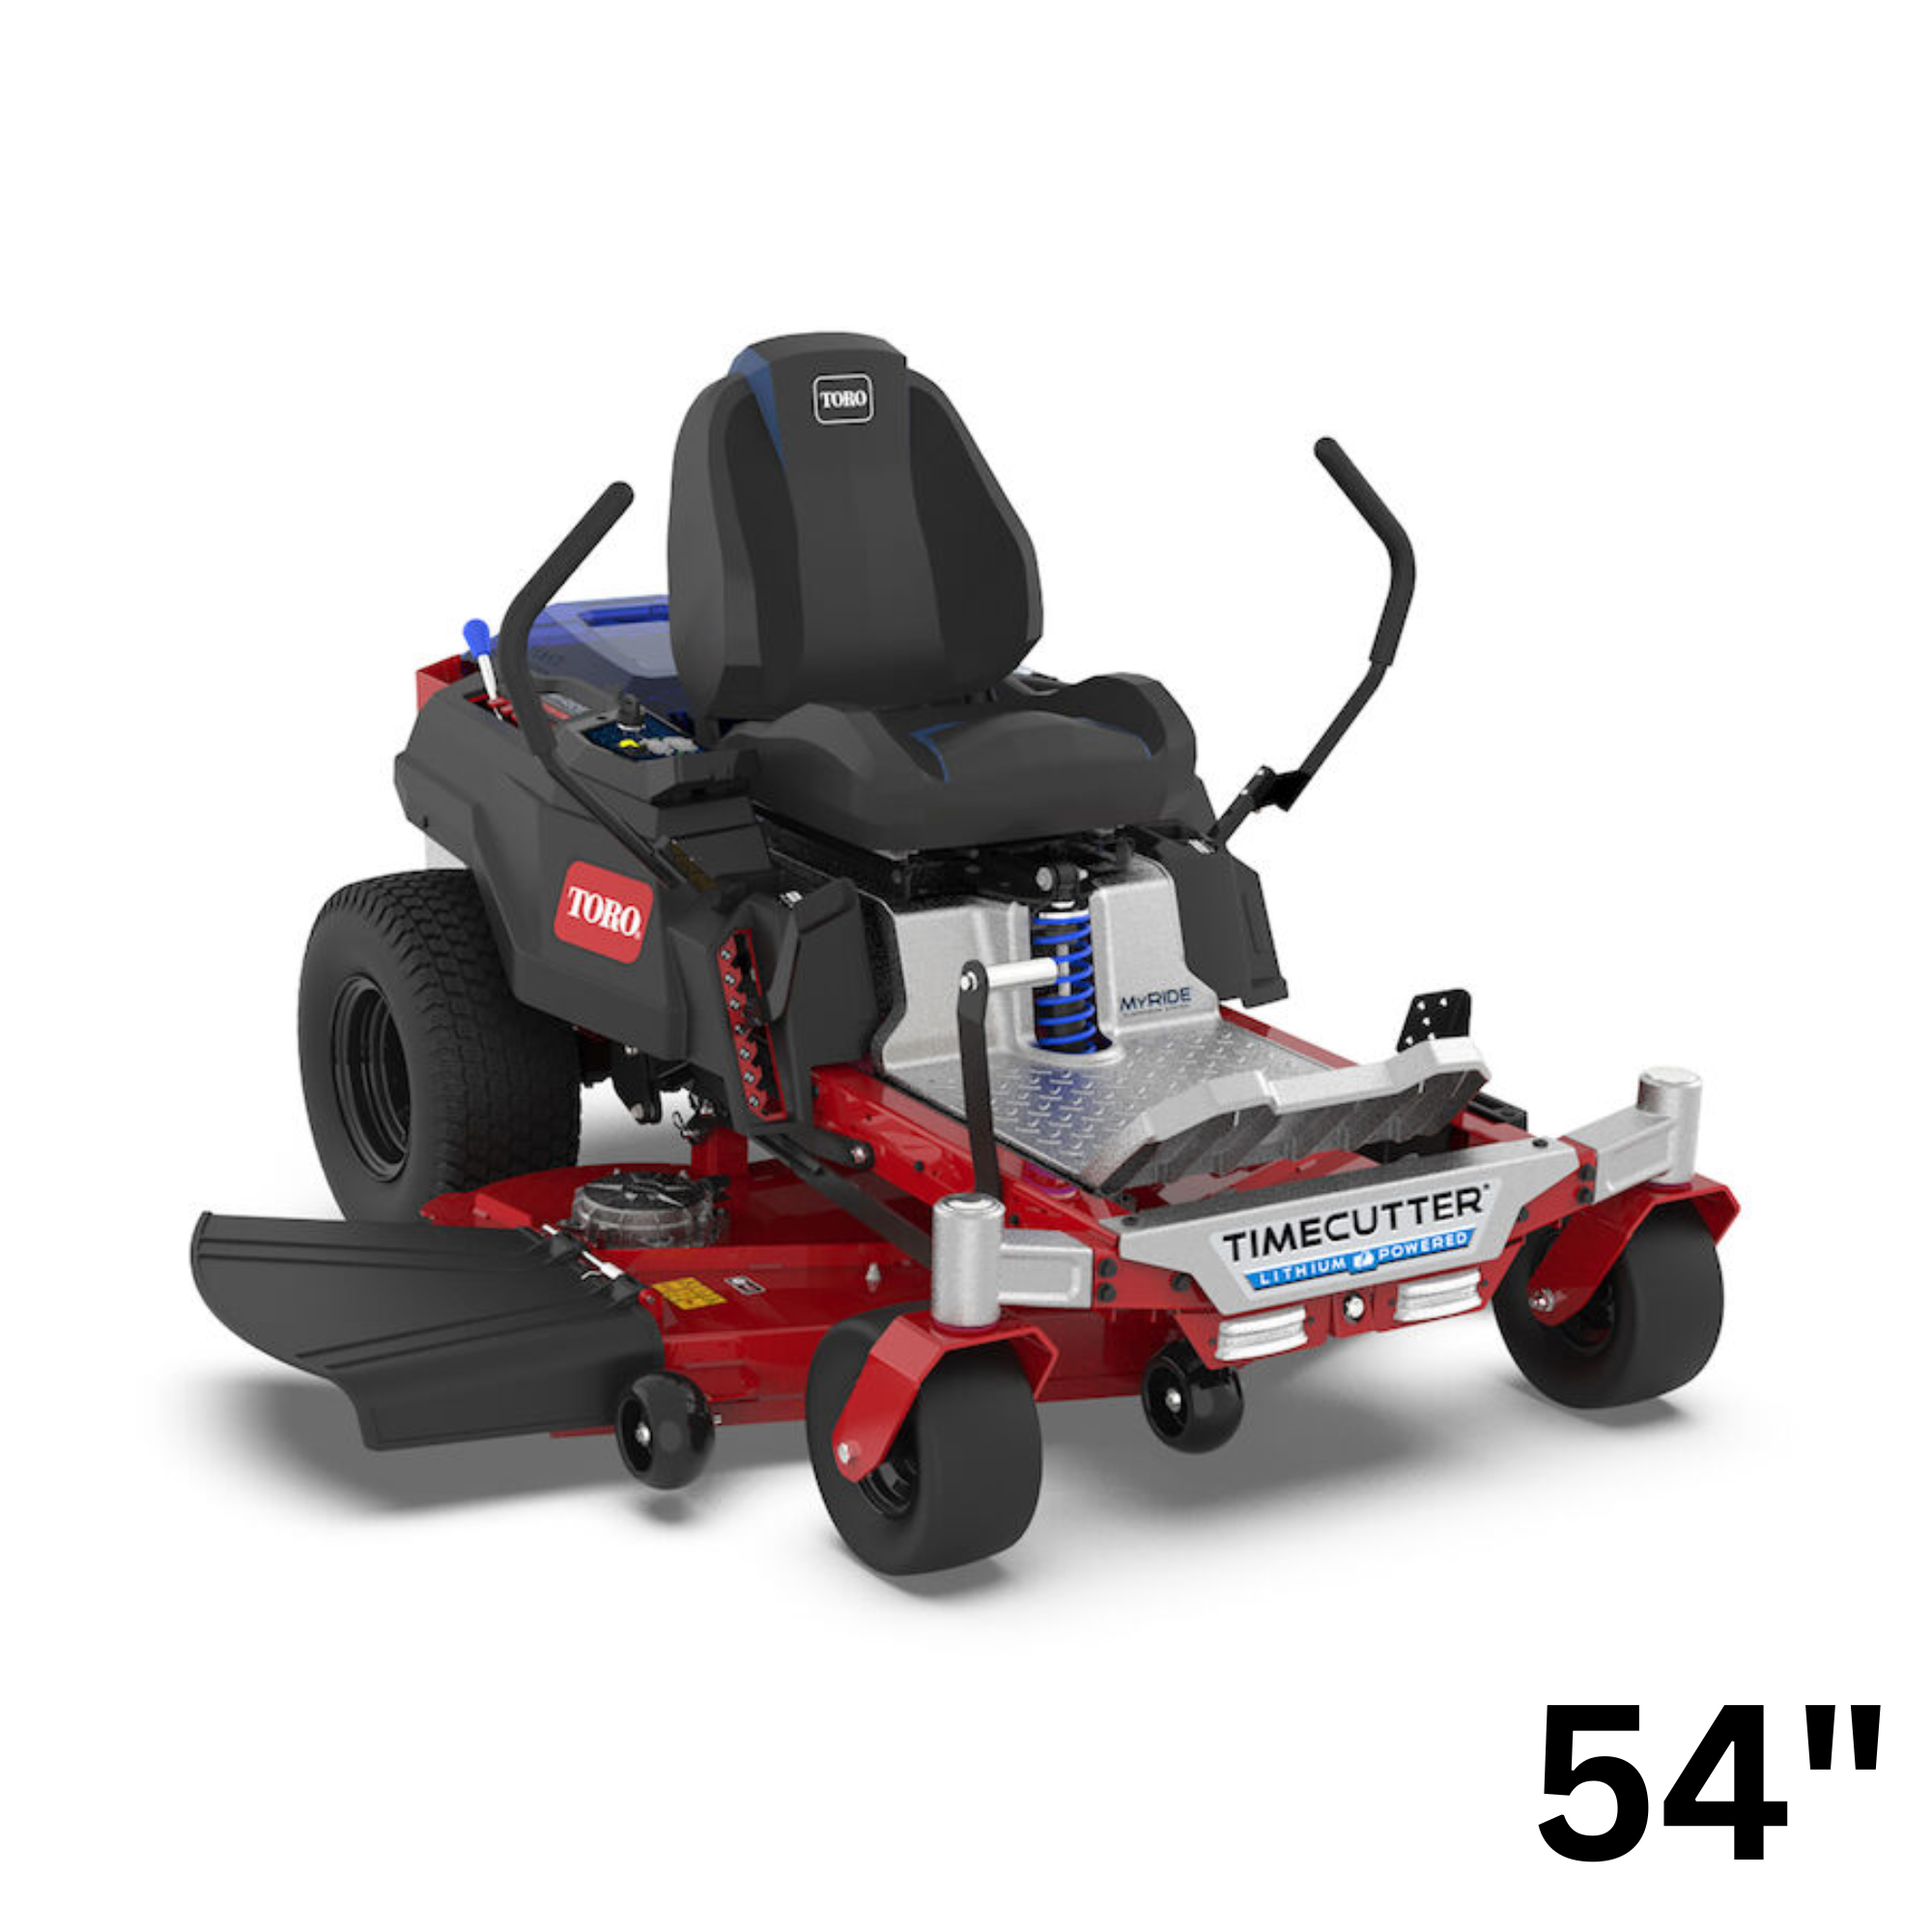 Toro 60V MAX 54 in. TimeCutter MyRIDE Zero Turn Mower w/ (5) 10.0Ah & (1) 4.0Ah Batteries and Charger| 75851